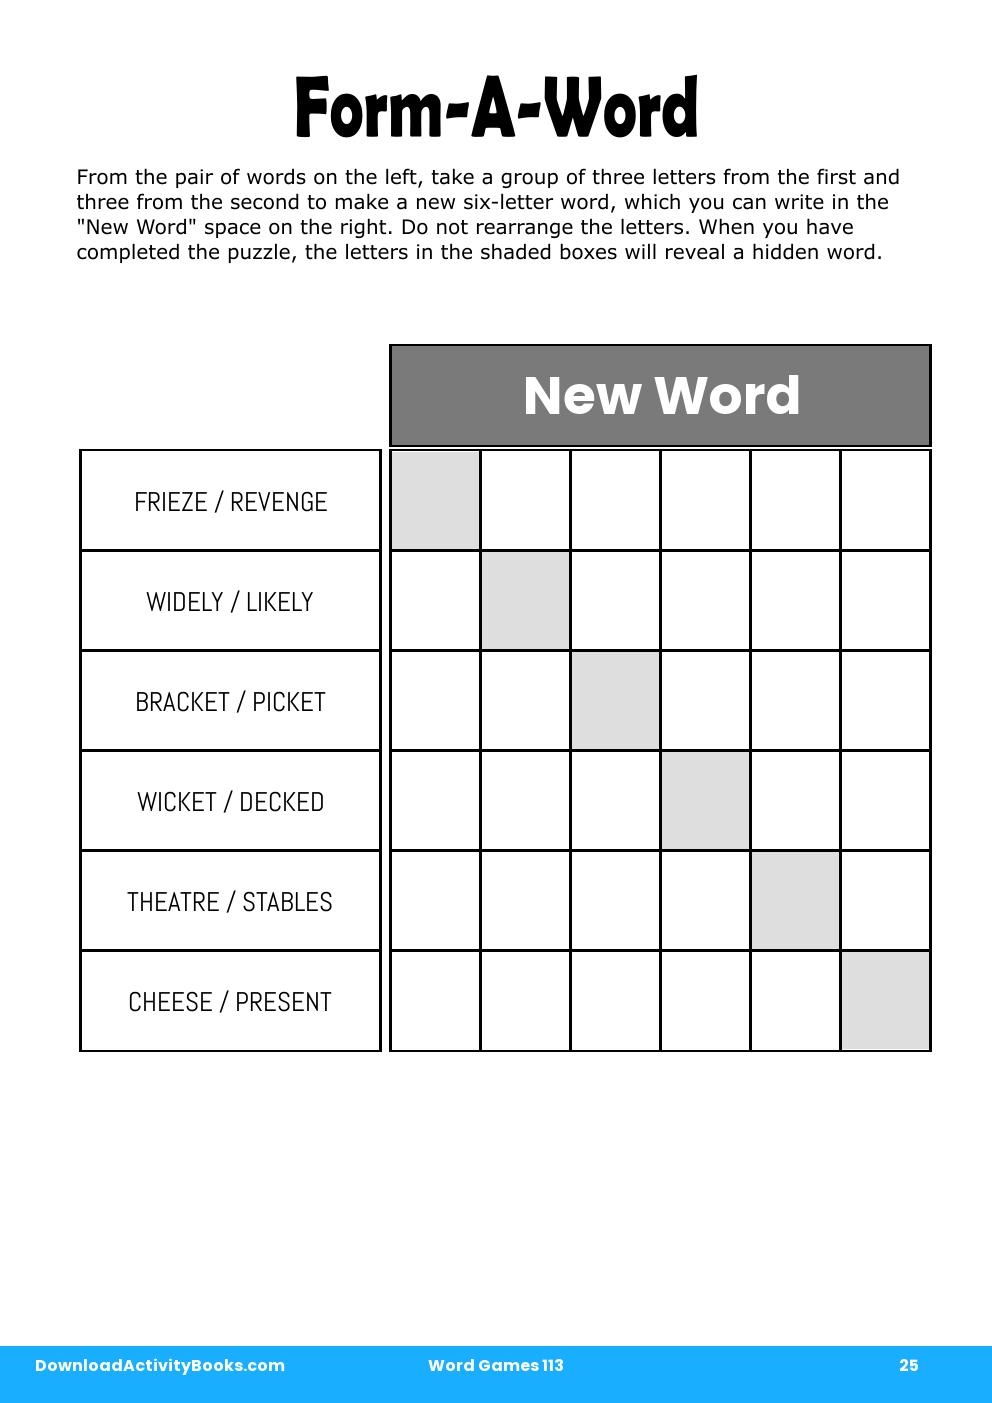 Form-A-Word in Word Games 113